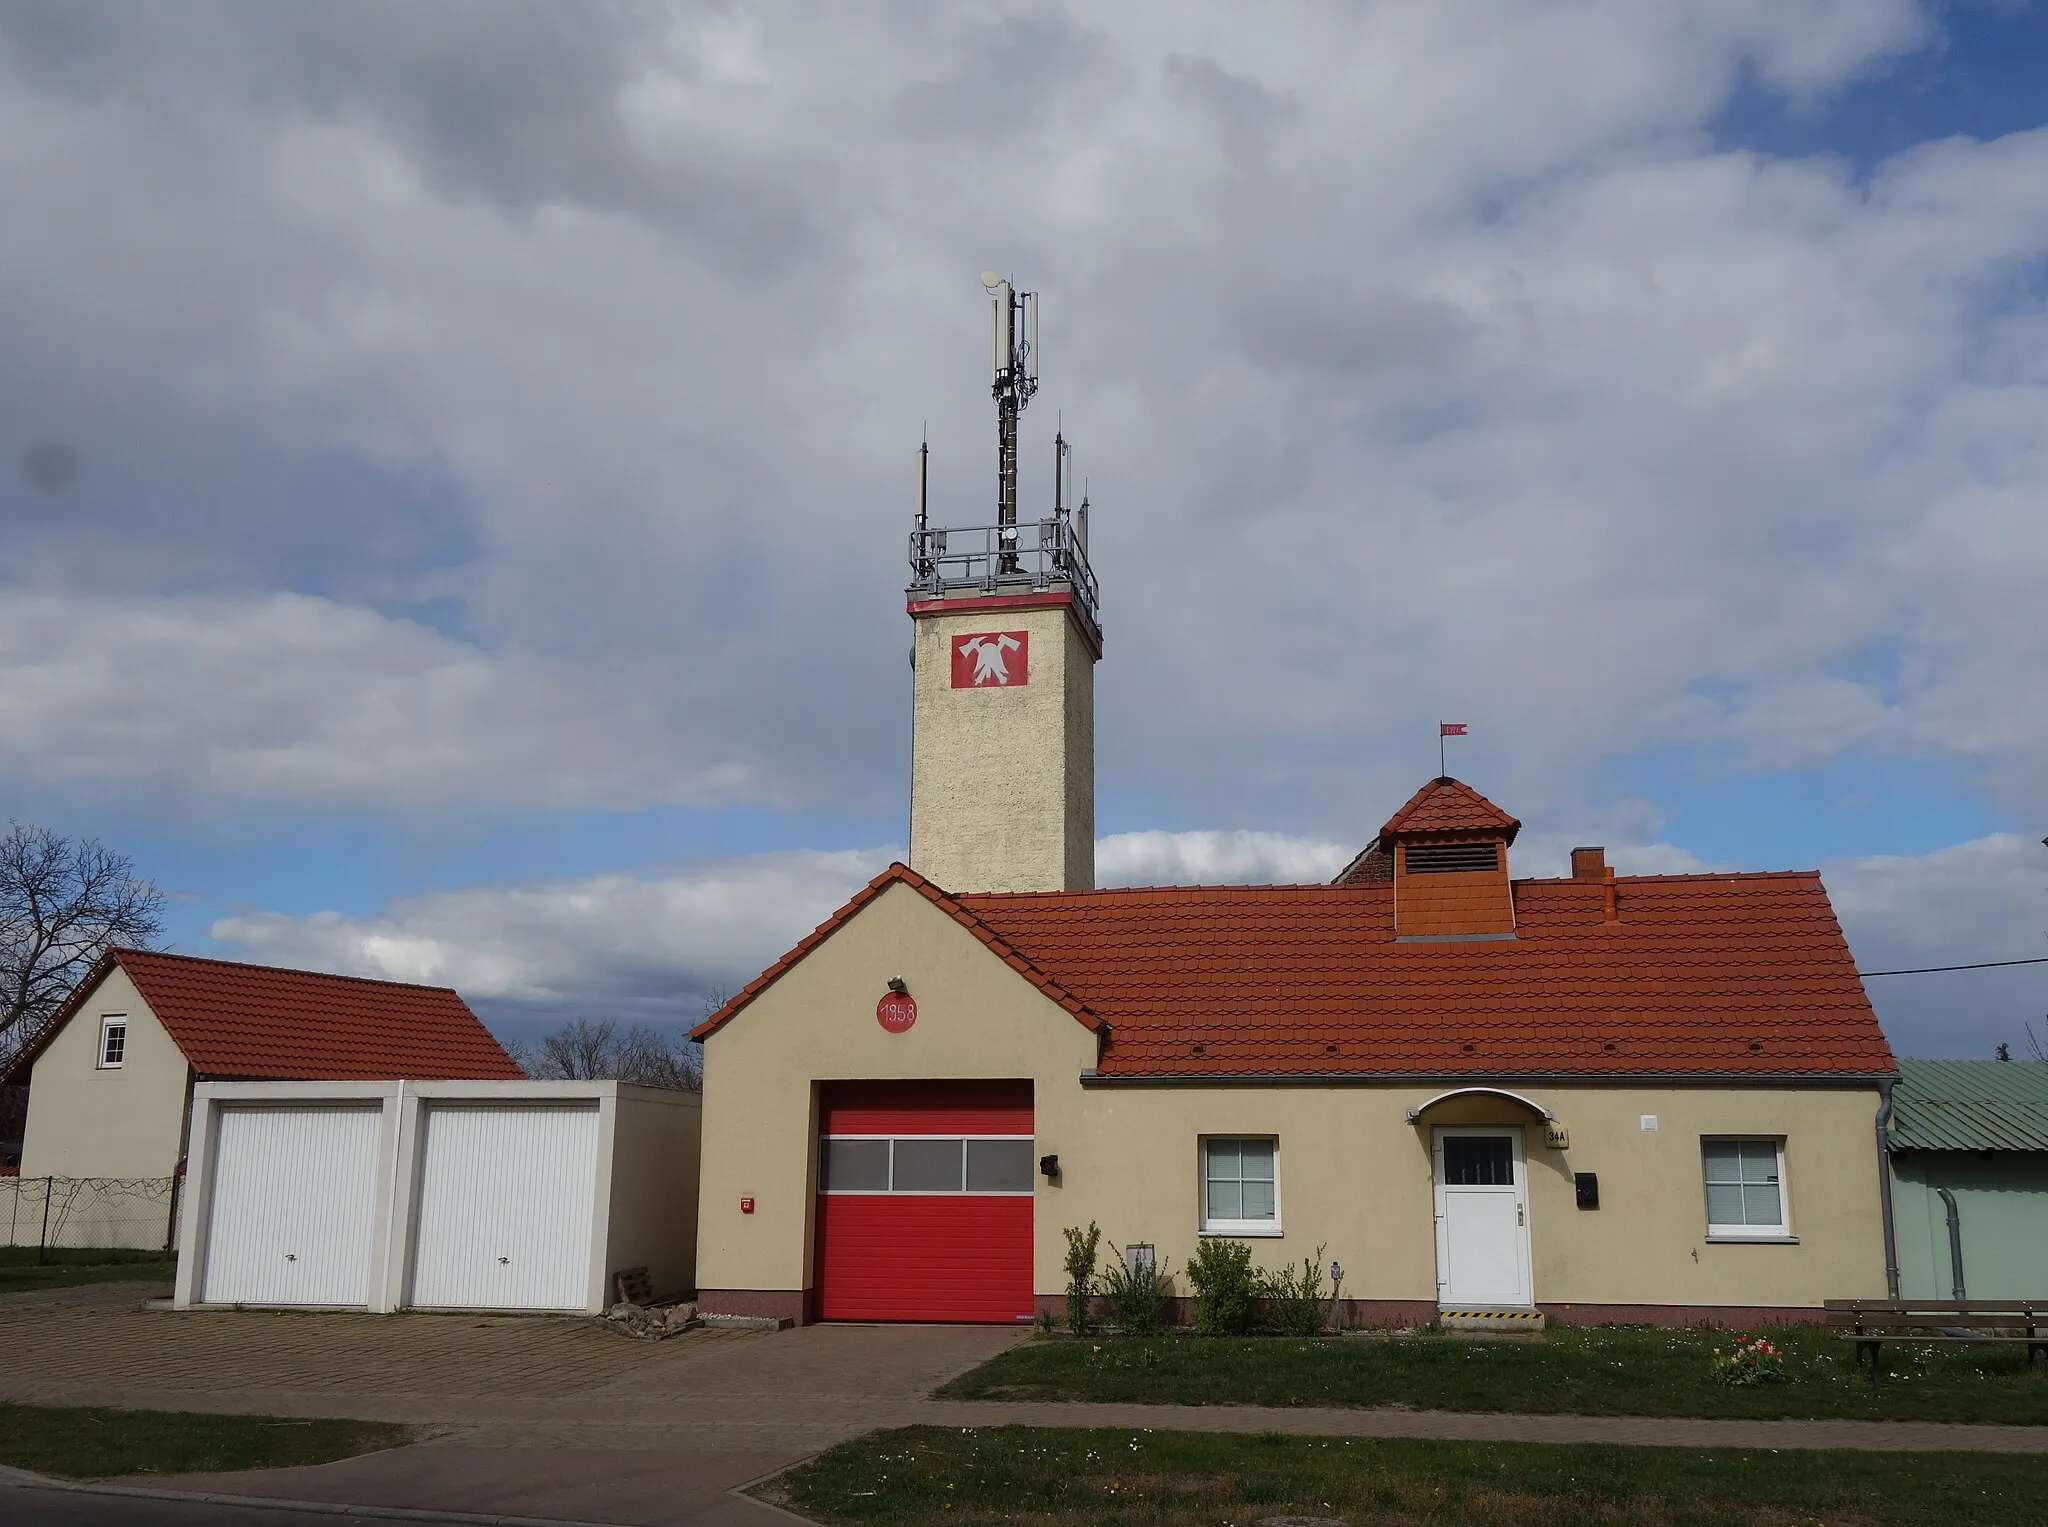 Photo showing: South-western view of the station of the volunteer firefighters  in Schwante , Oberkrämer municipality , Oberhavel district, Brandenburg state, Germany.